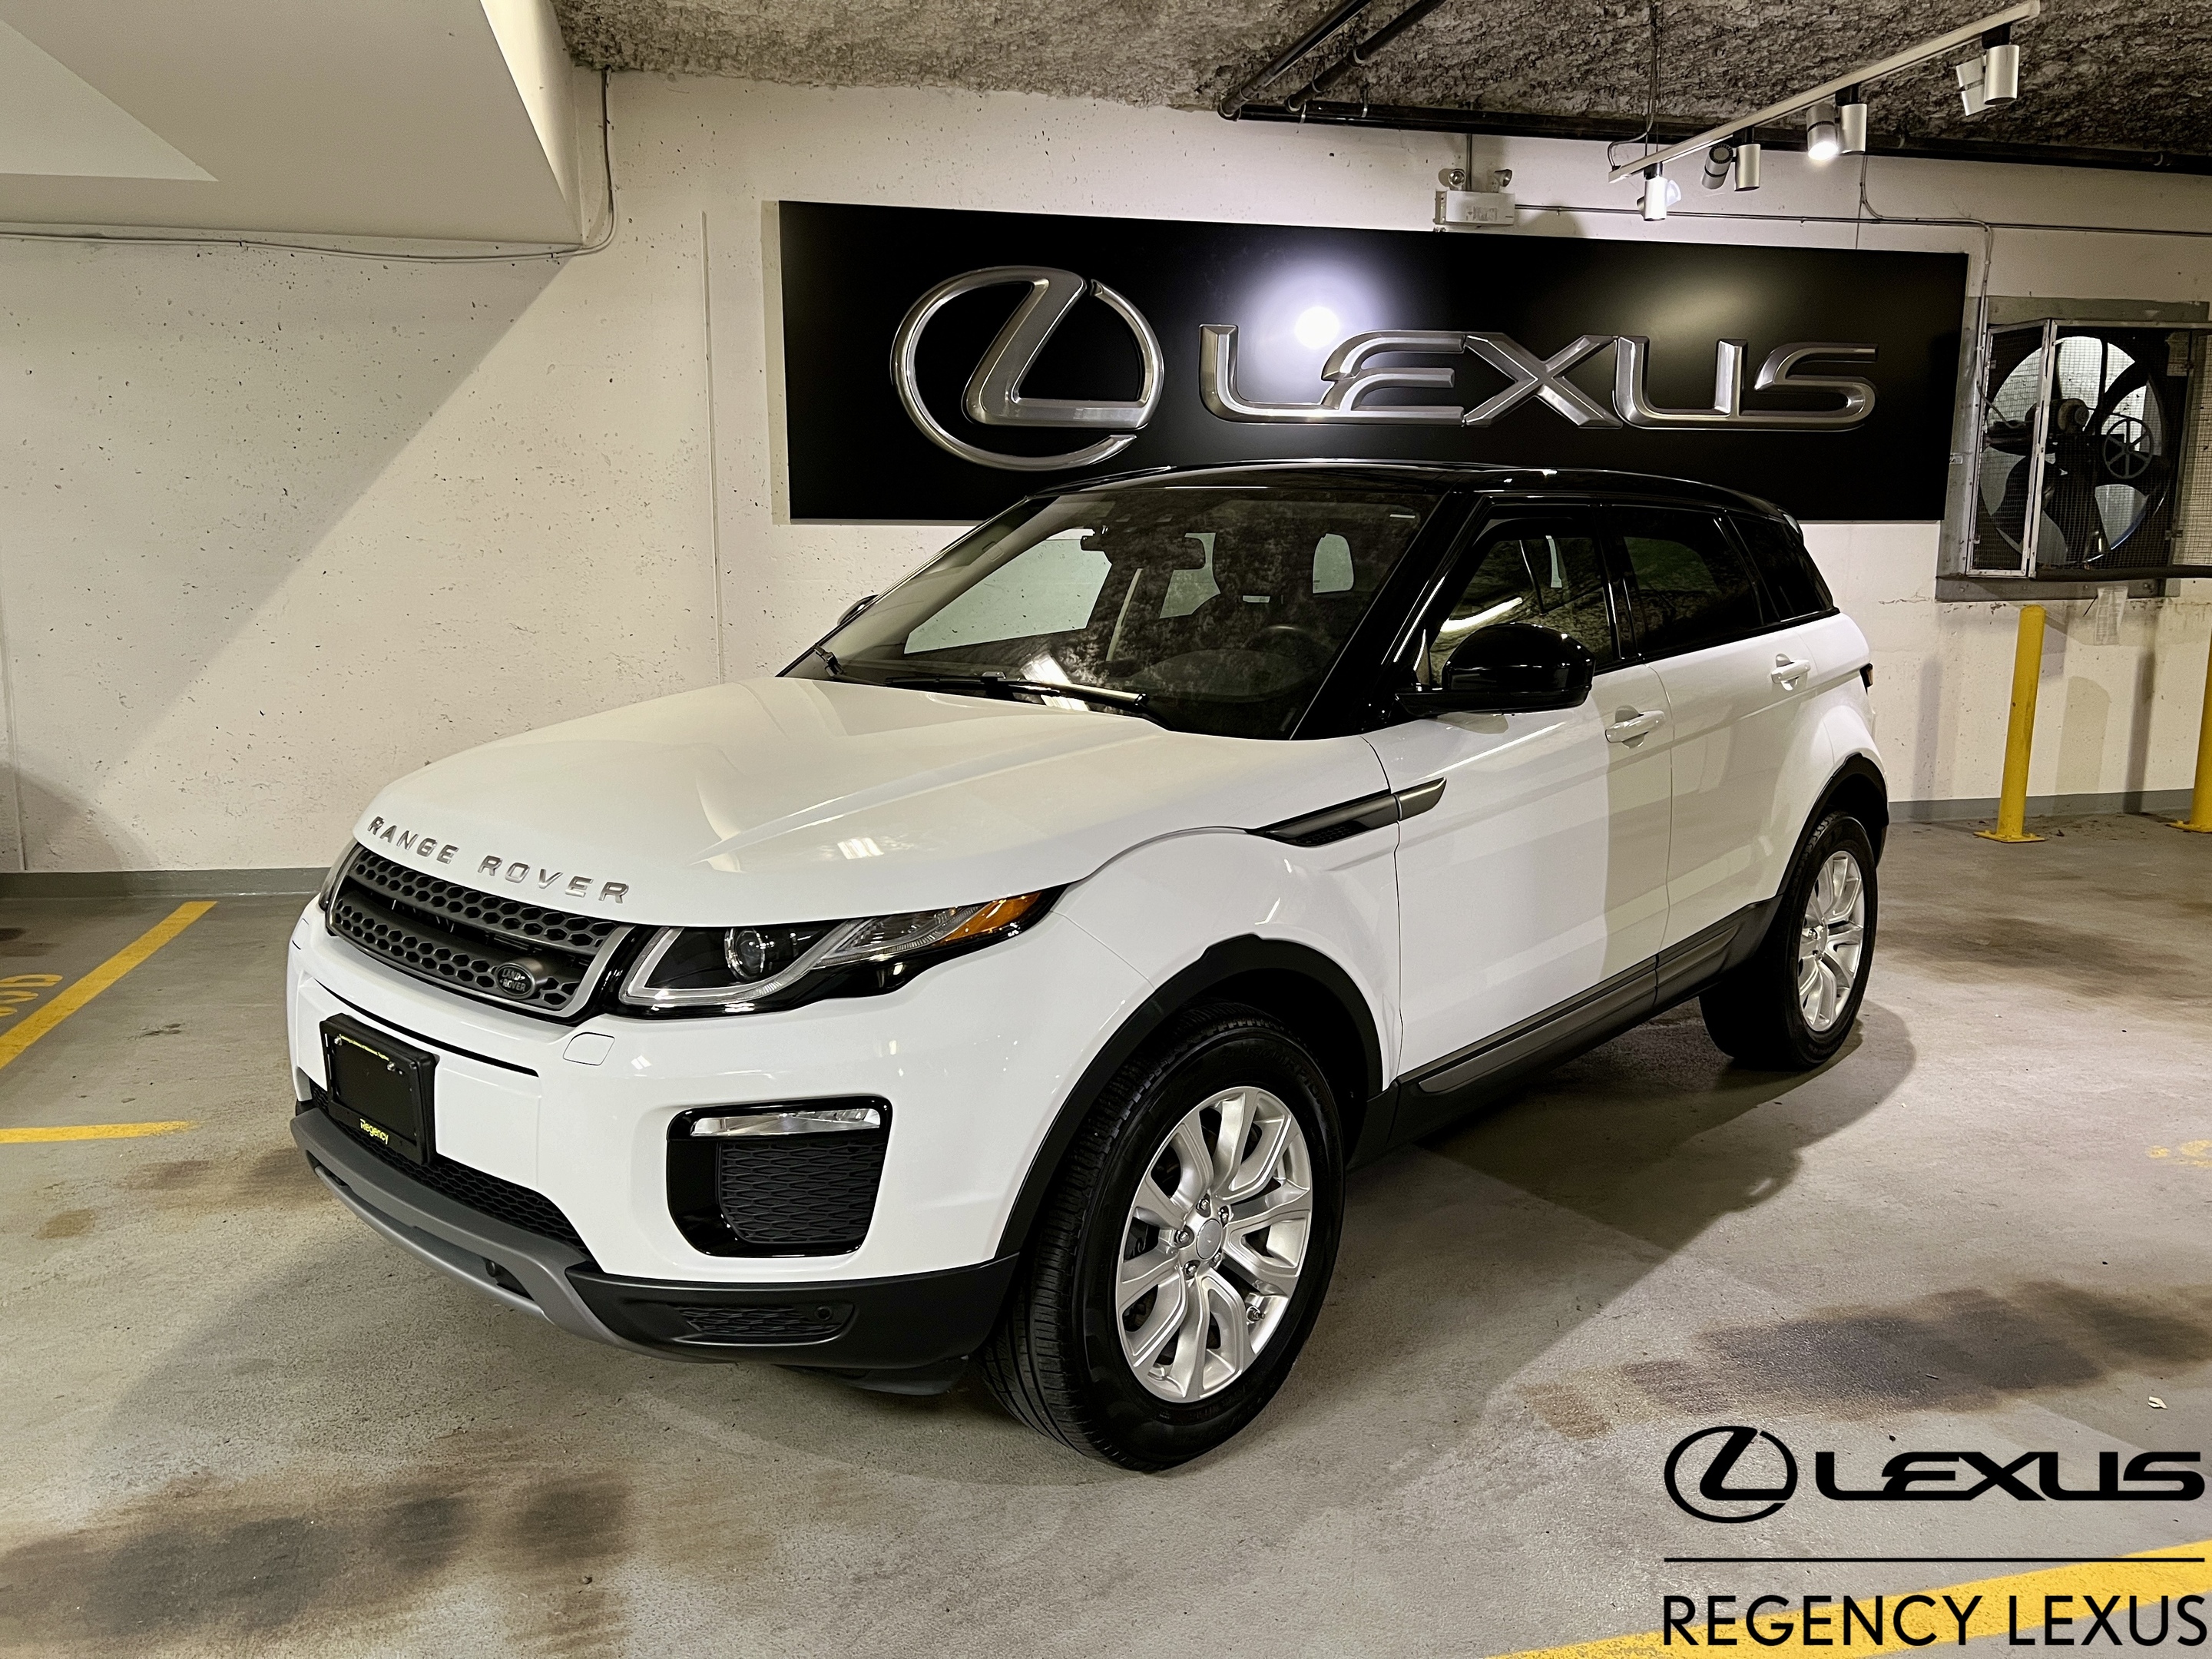 2018 Land Rover Range Rover Evoque NO ACCIDENTS SE AWD MERIDIAN PANROOF NAV LEATHER